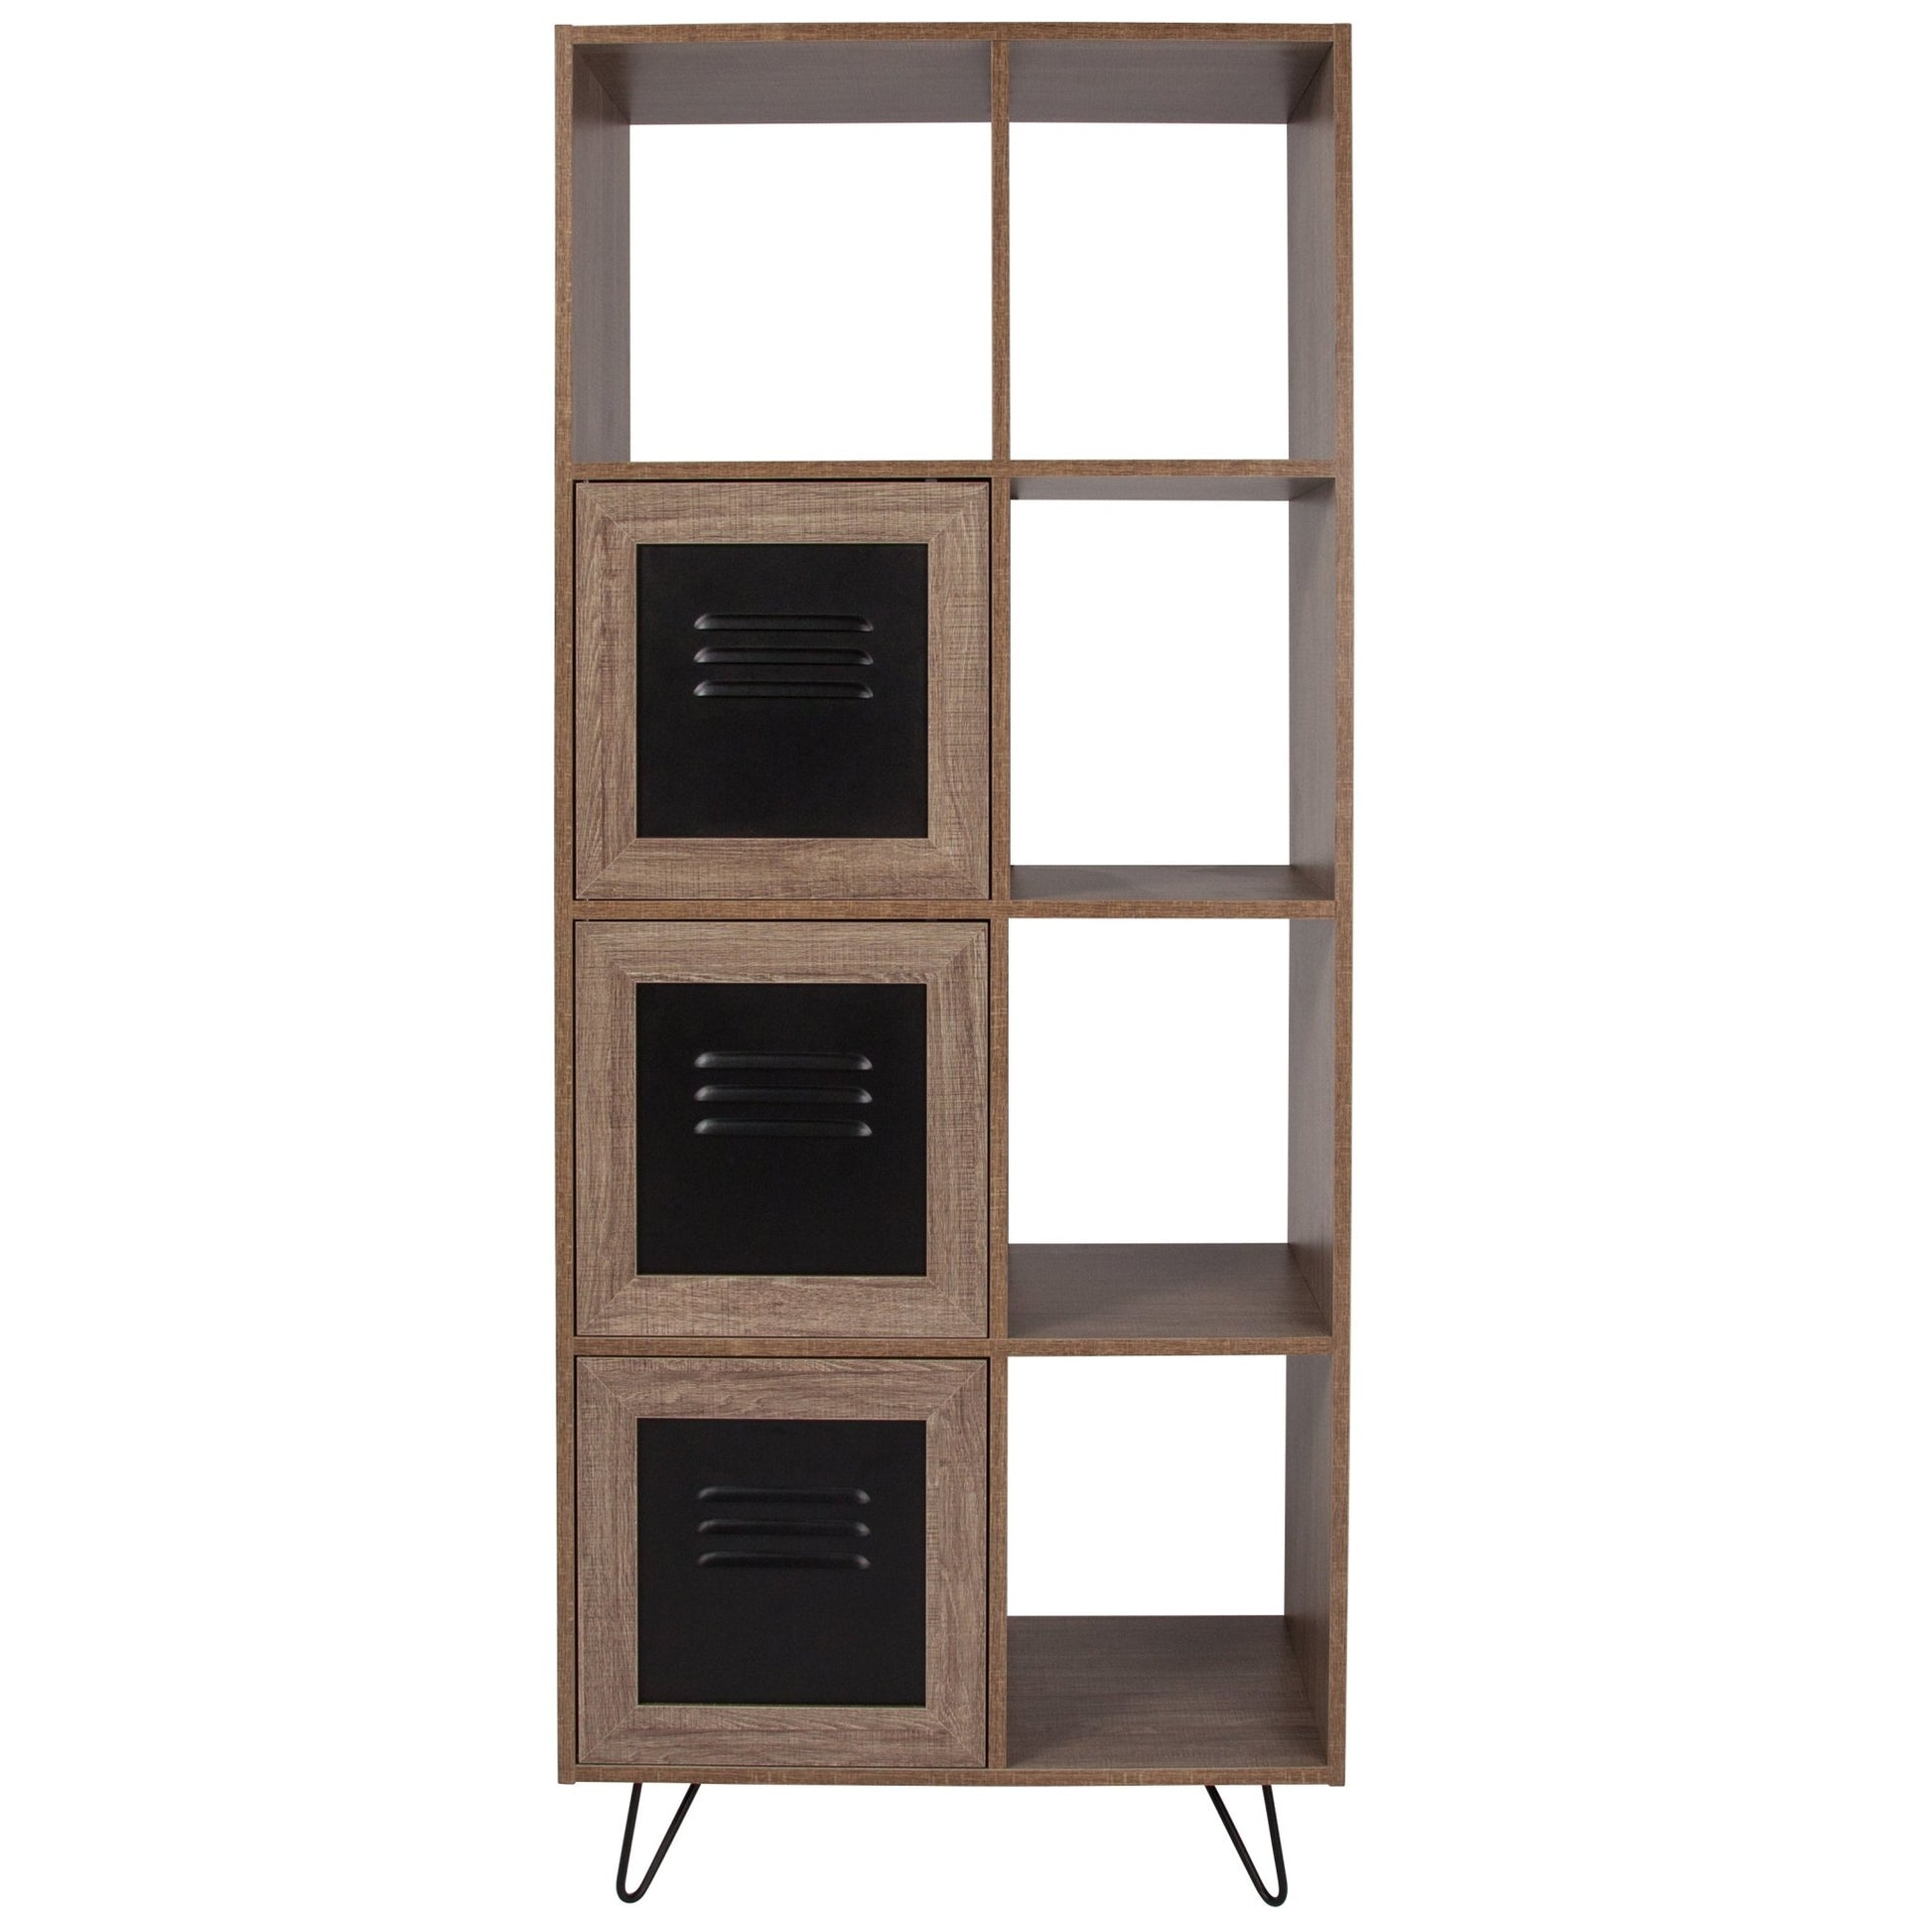 Woodridge Collection 63"H 5 Cube Storage Organizer Bookcase with Metal Cabinet Doors in Rustic Wood Grain Finish - SchoolOutlet